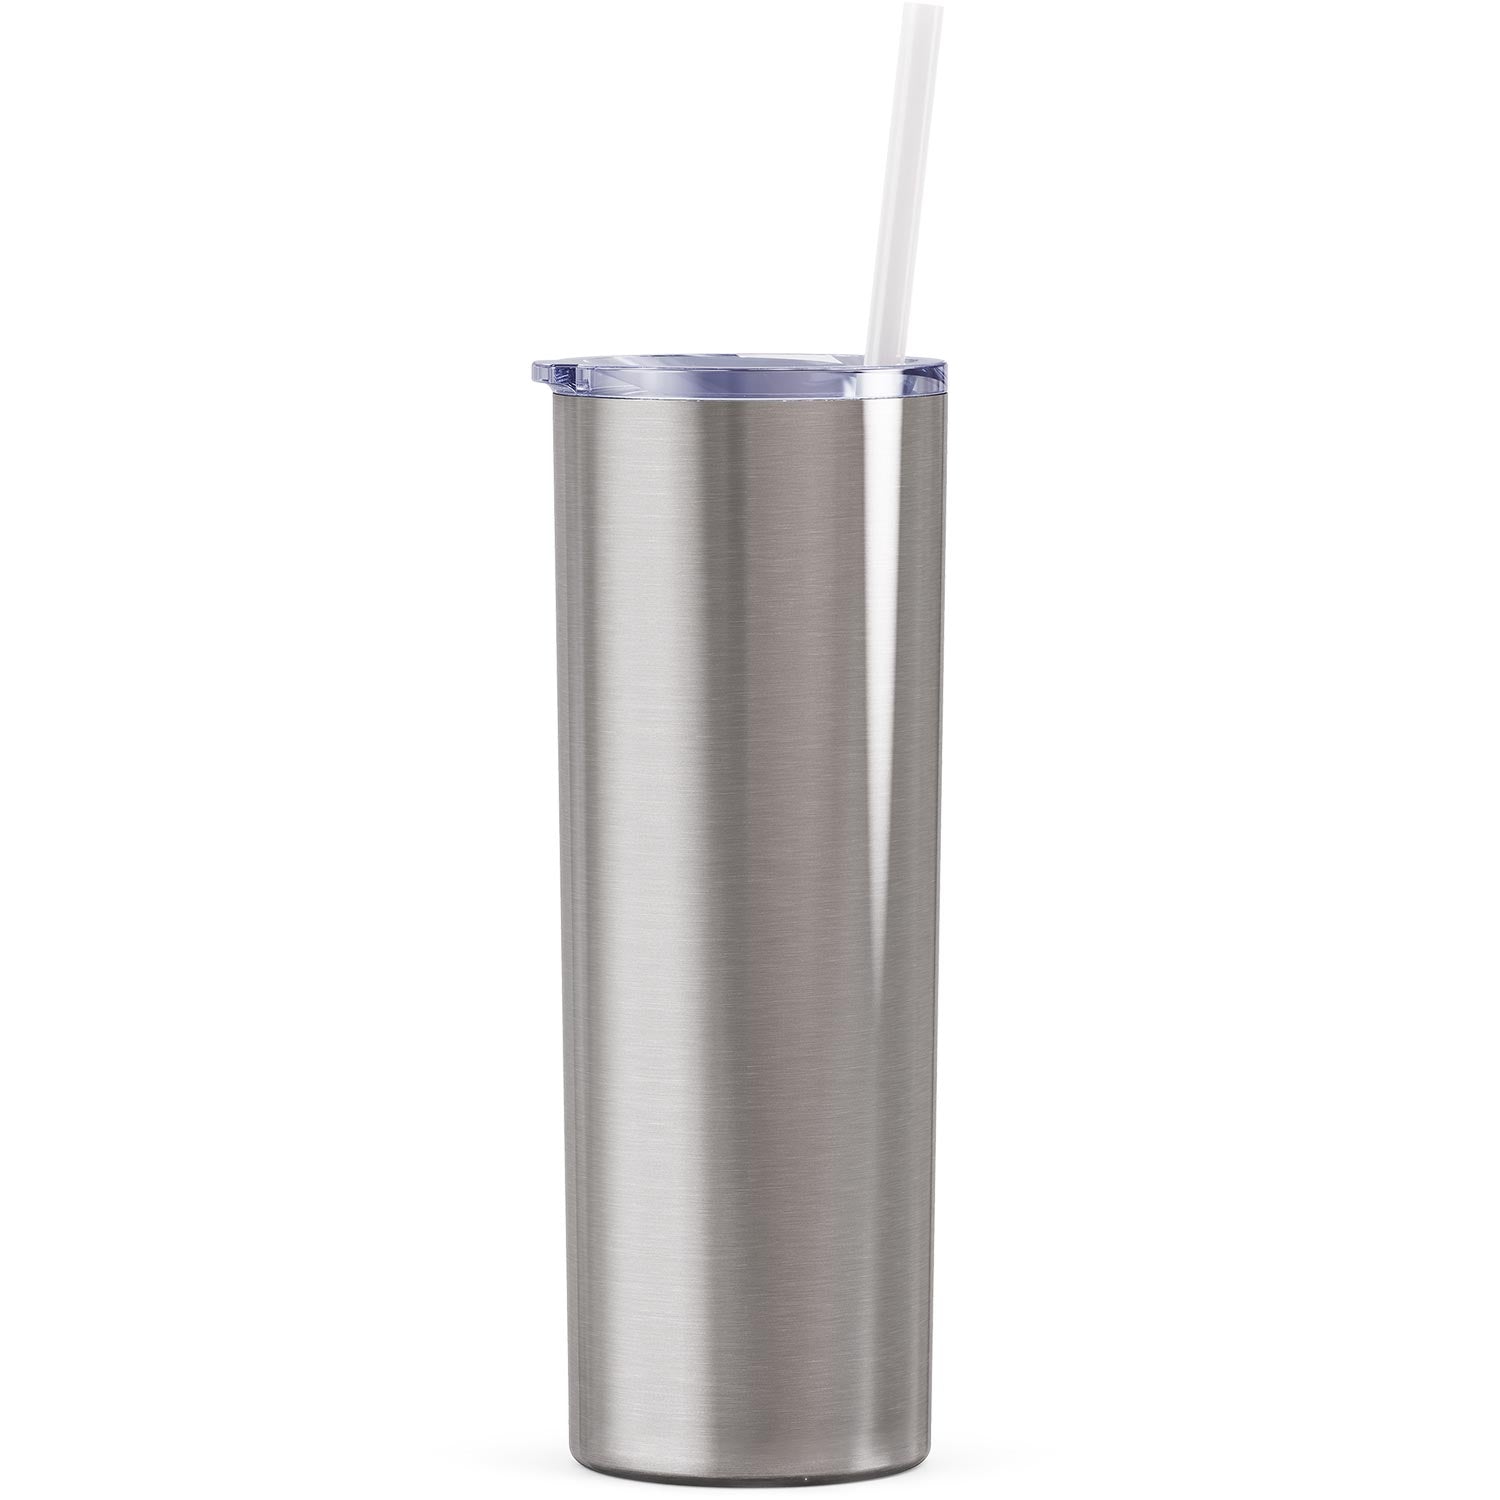 Maars Skinny Stainless Steel Tumbler Double Wall 20oz - Save A Cup